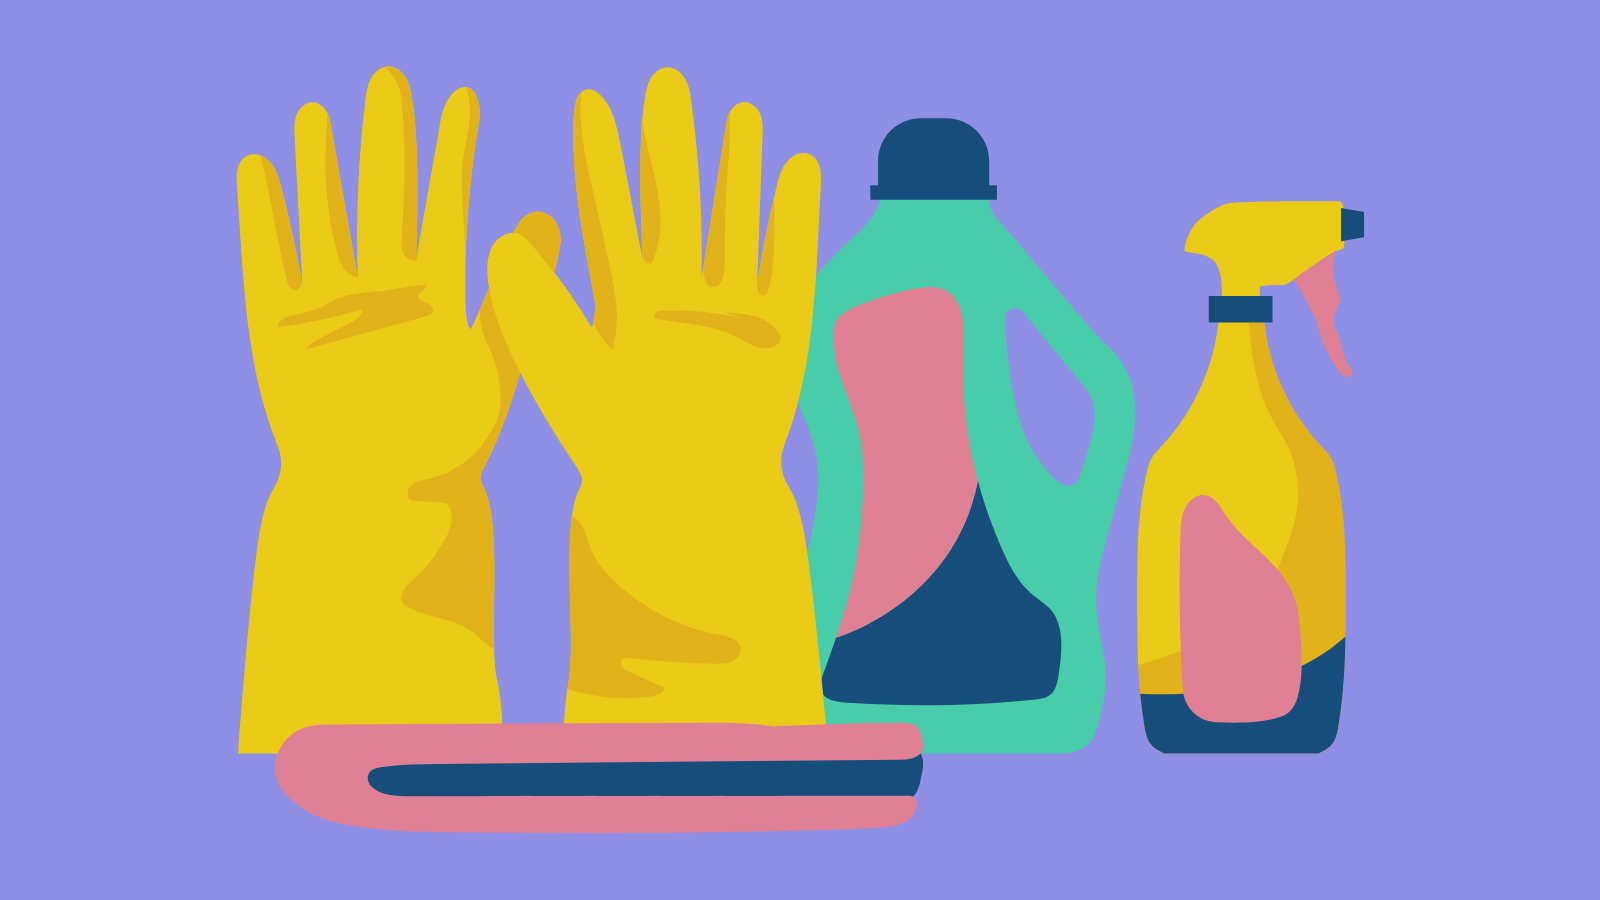 A pair of cleaning gloves, a bottle of bleach, a spray bottle, and a towel